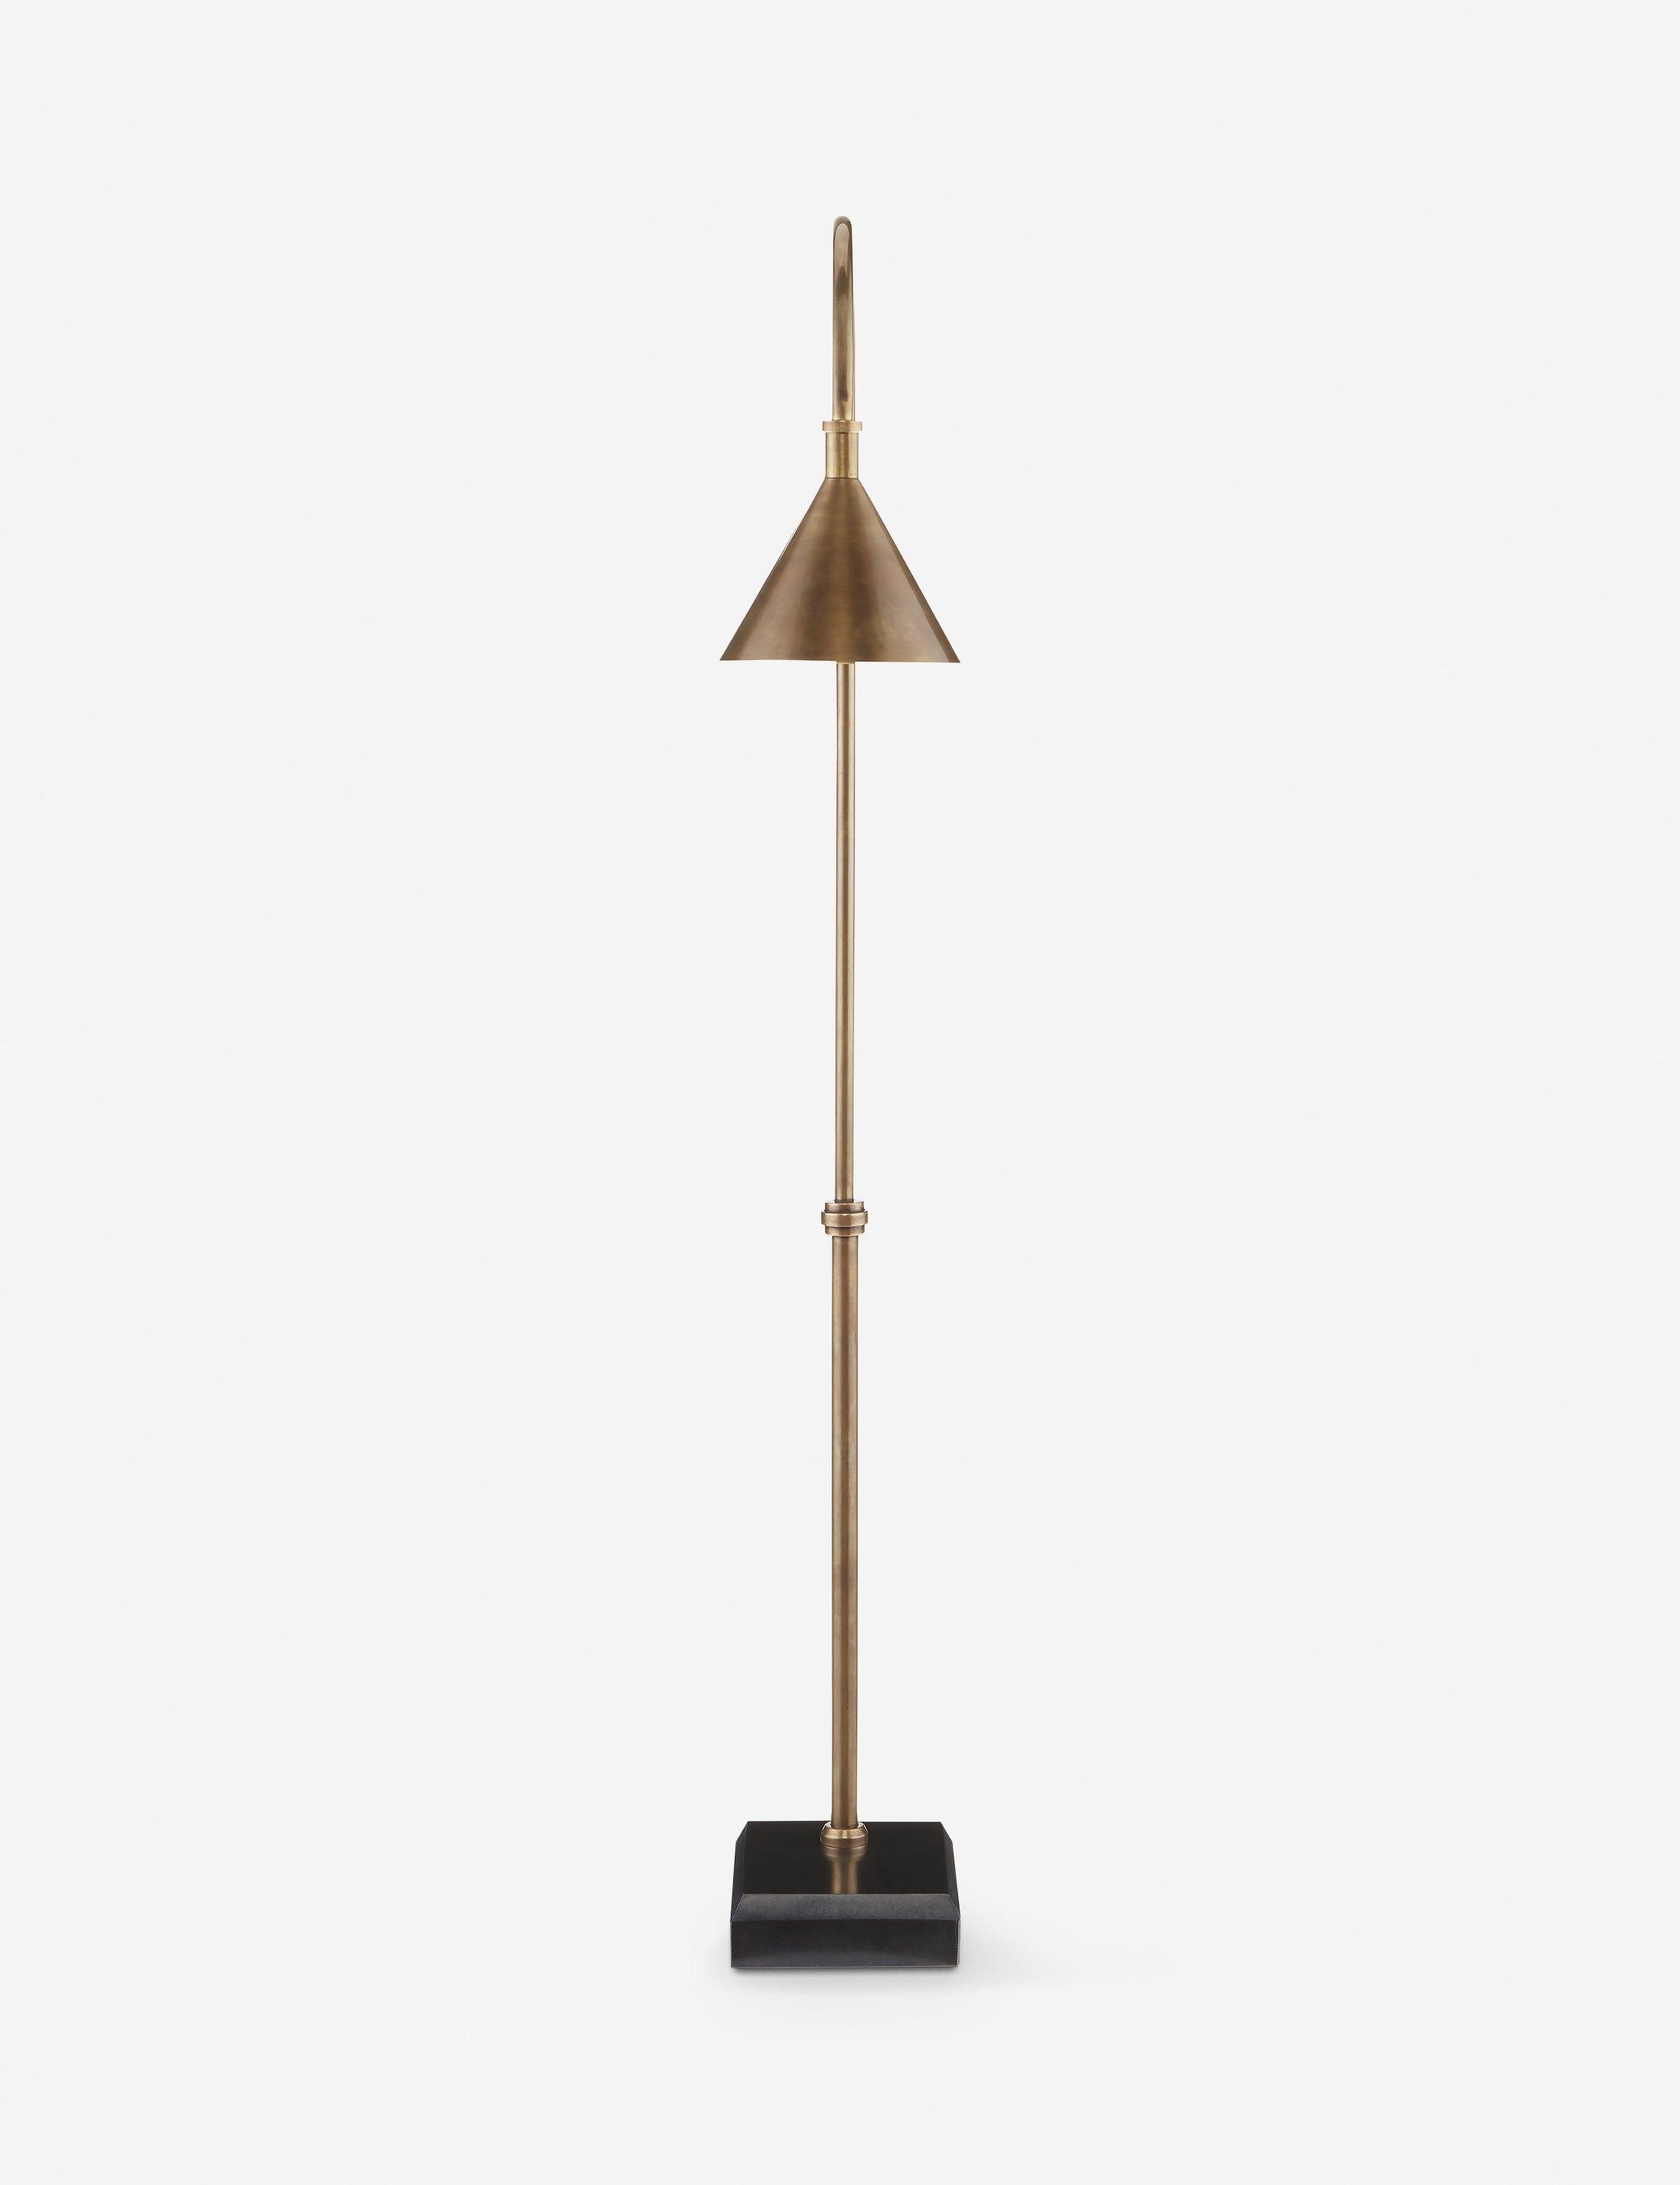 Vision Arched Cordless Floor Lamp in Vintage Brass and Black